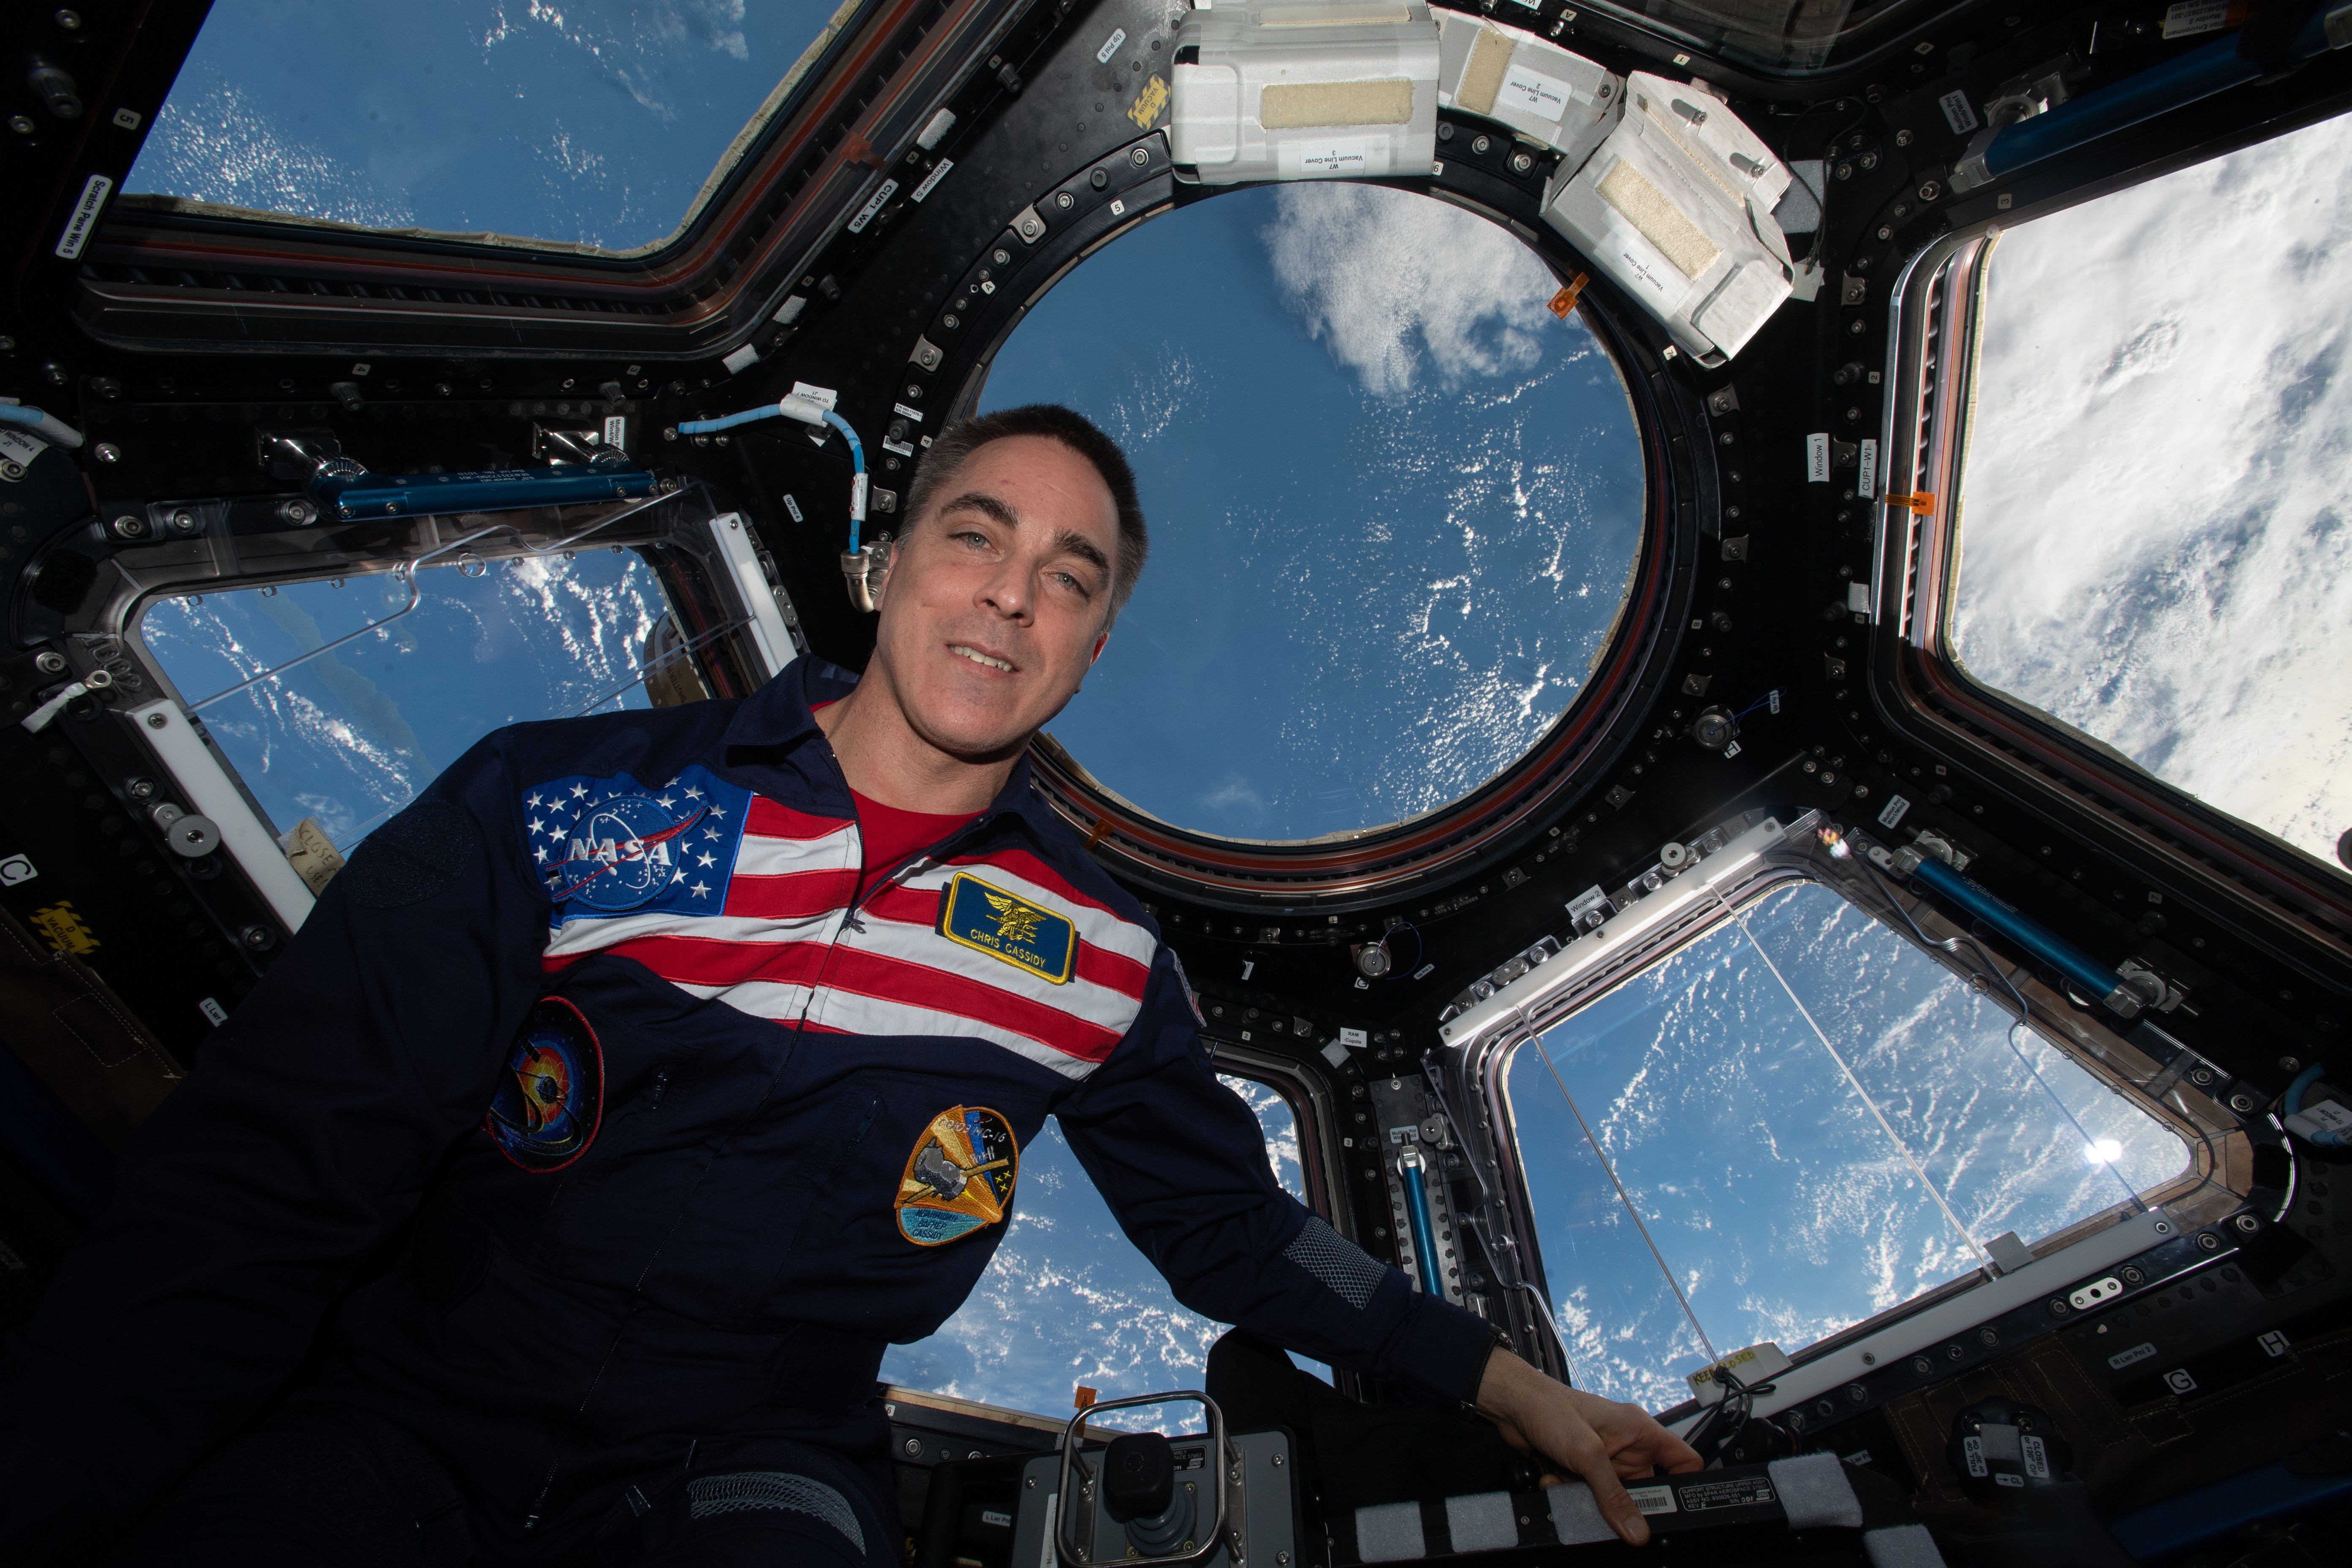 Astronaut Chris Cassidy in the present moment of the ISS